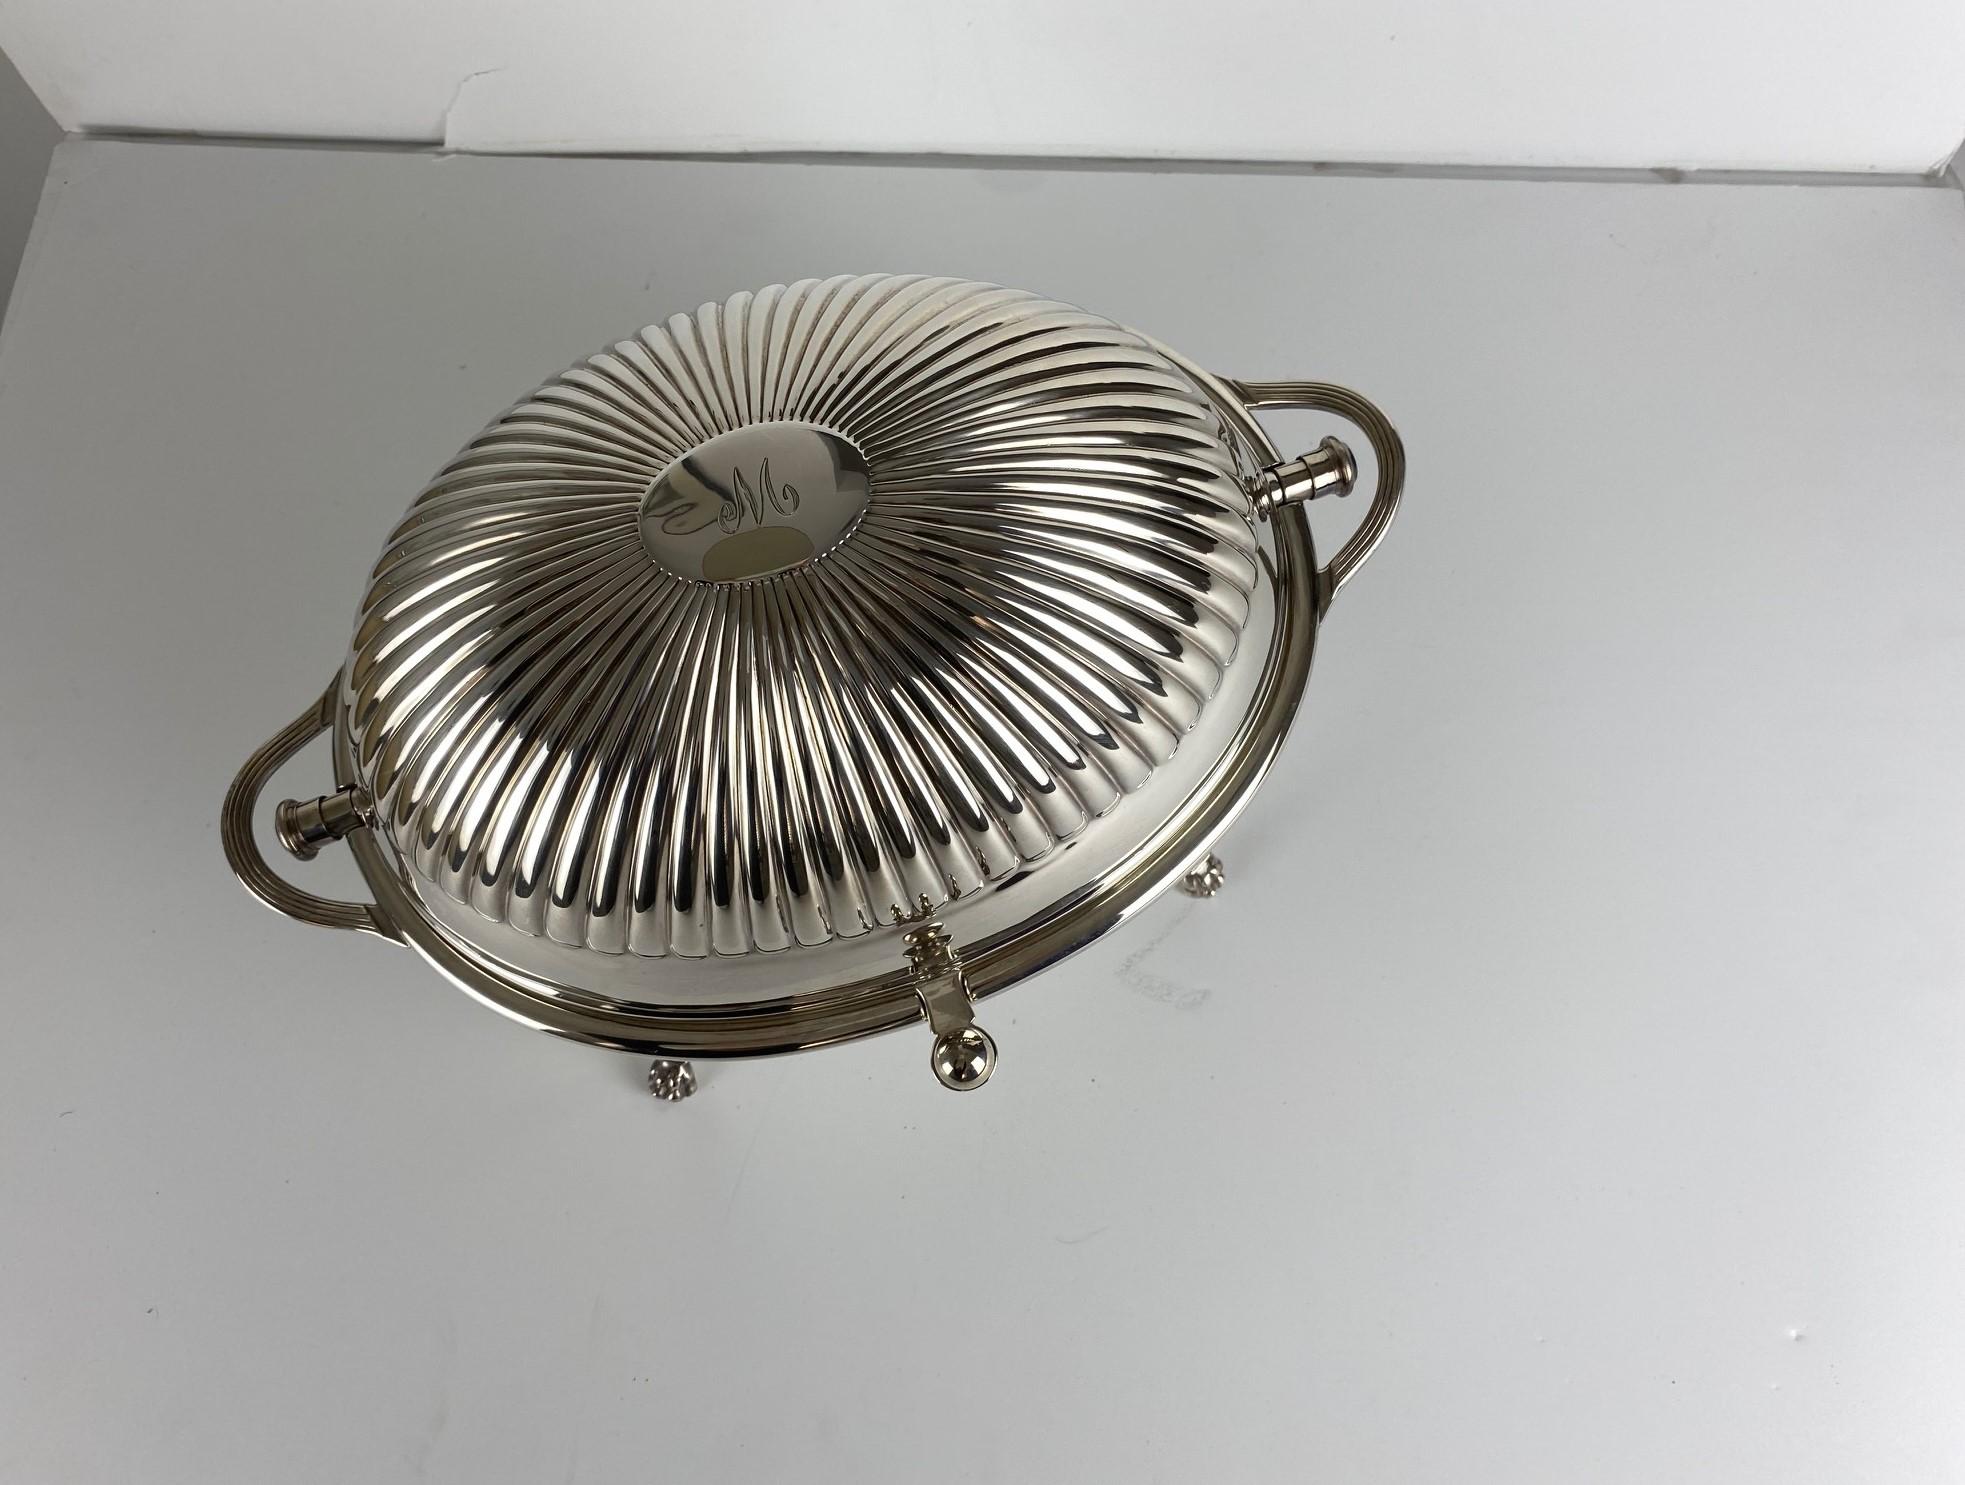 This is an antique roll-over serving dish. An English, silver plated dome top tureen or server, engraved 